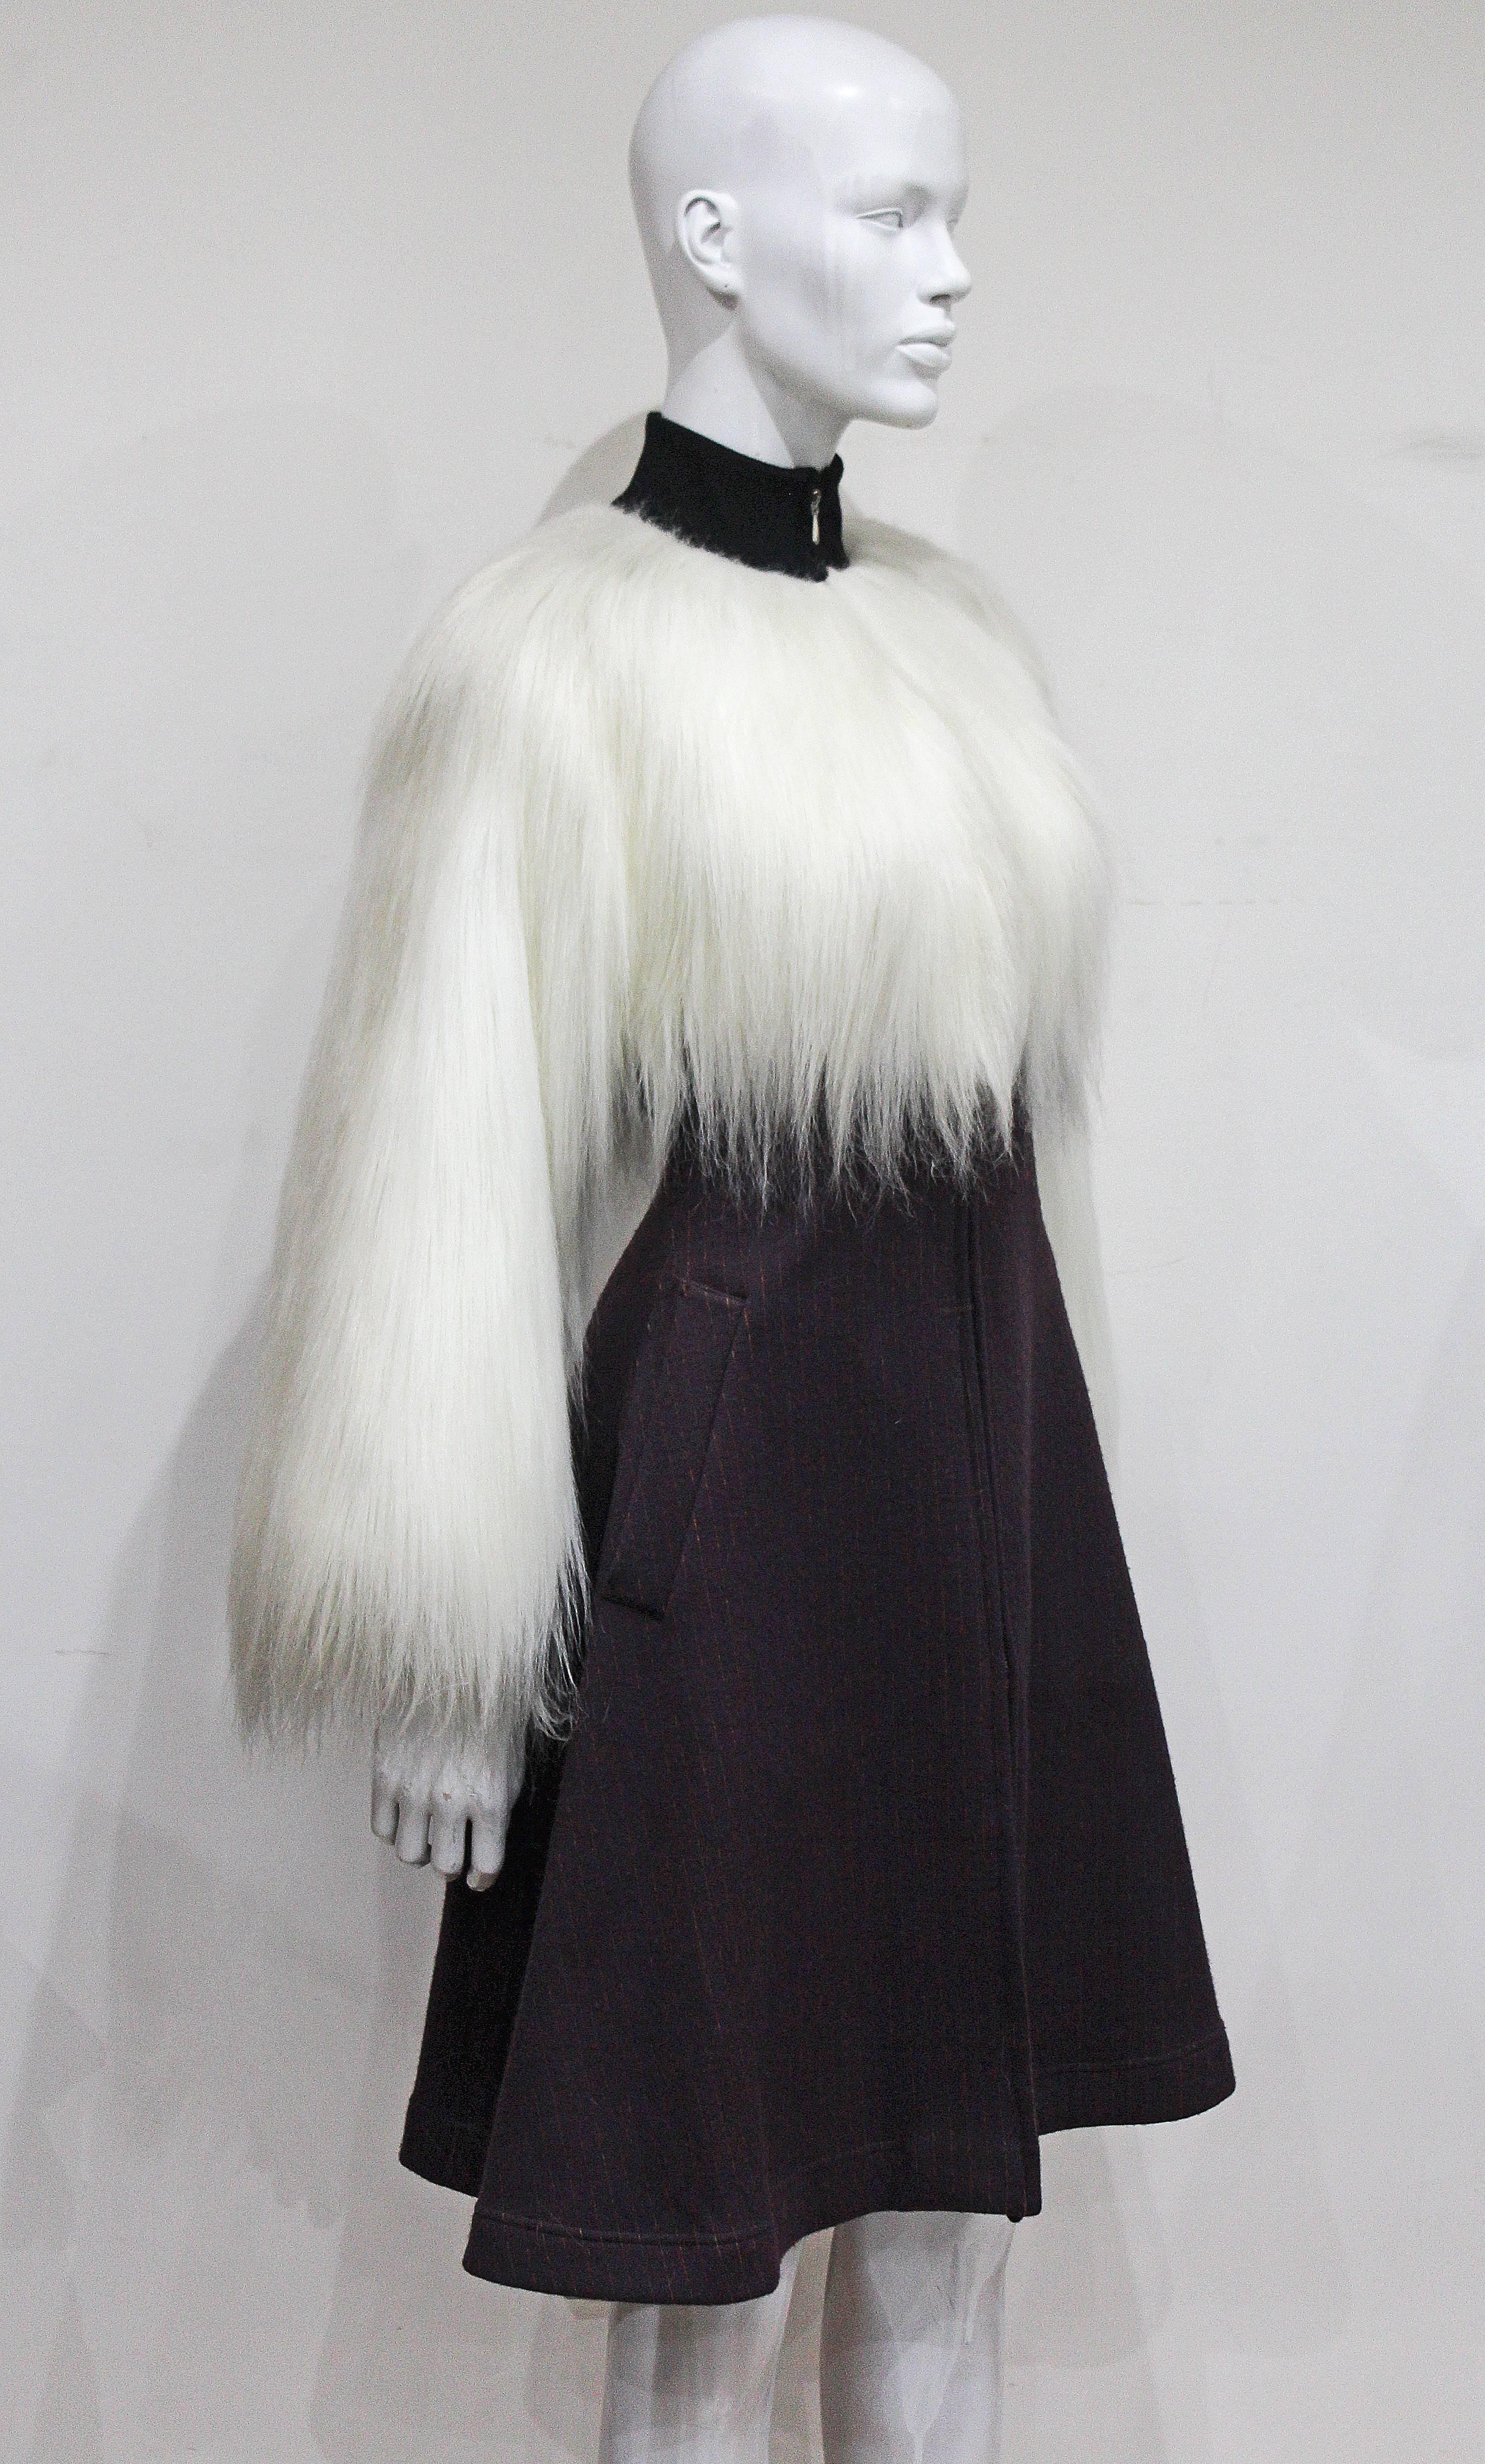 An incredible Jean Paul Gaultier fur dress coat from the year 1993. The dress features a long white fur on the bodice and sleeves, a woollen pinstripe flared skirt, metal zipper running through the centre and a black fitted polo neck. This dress is